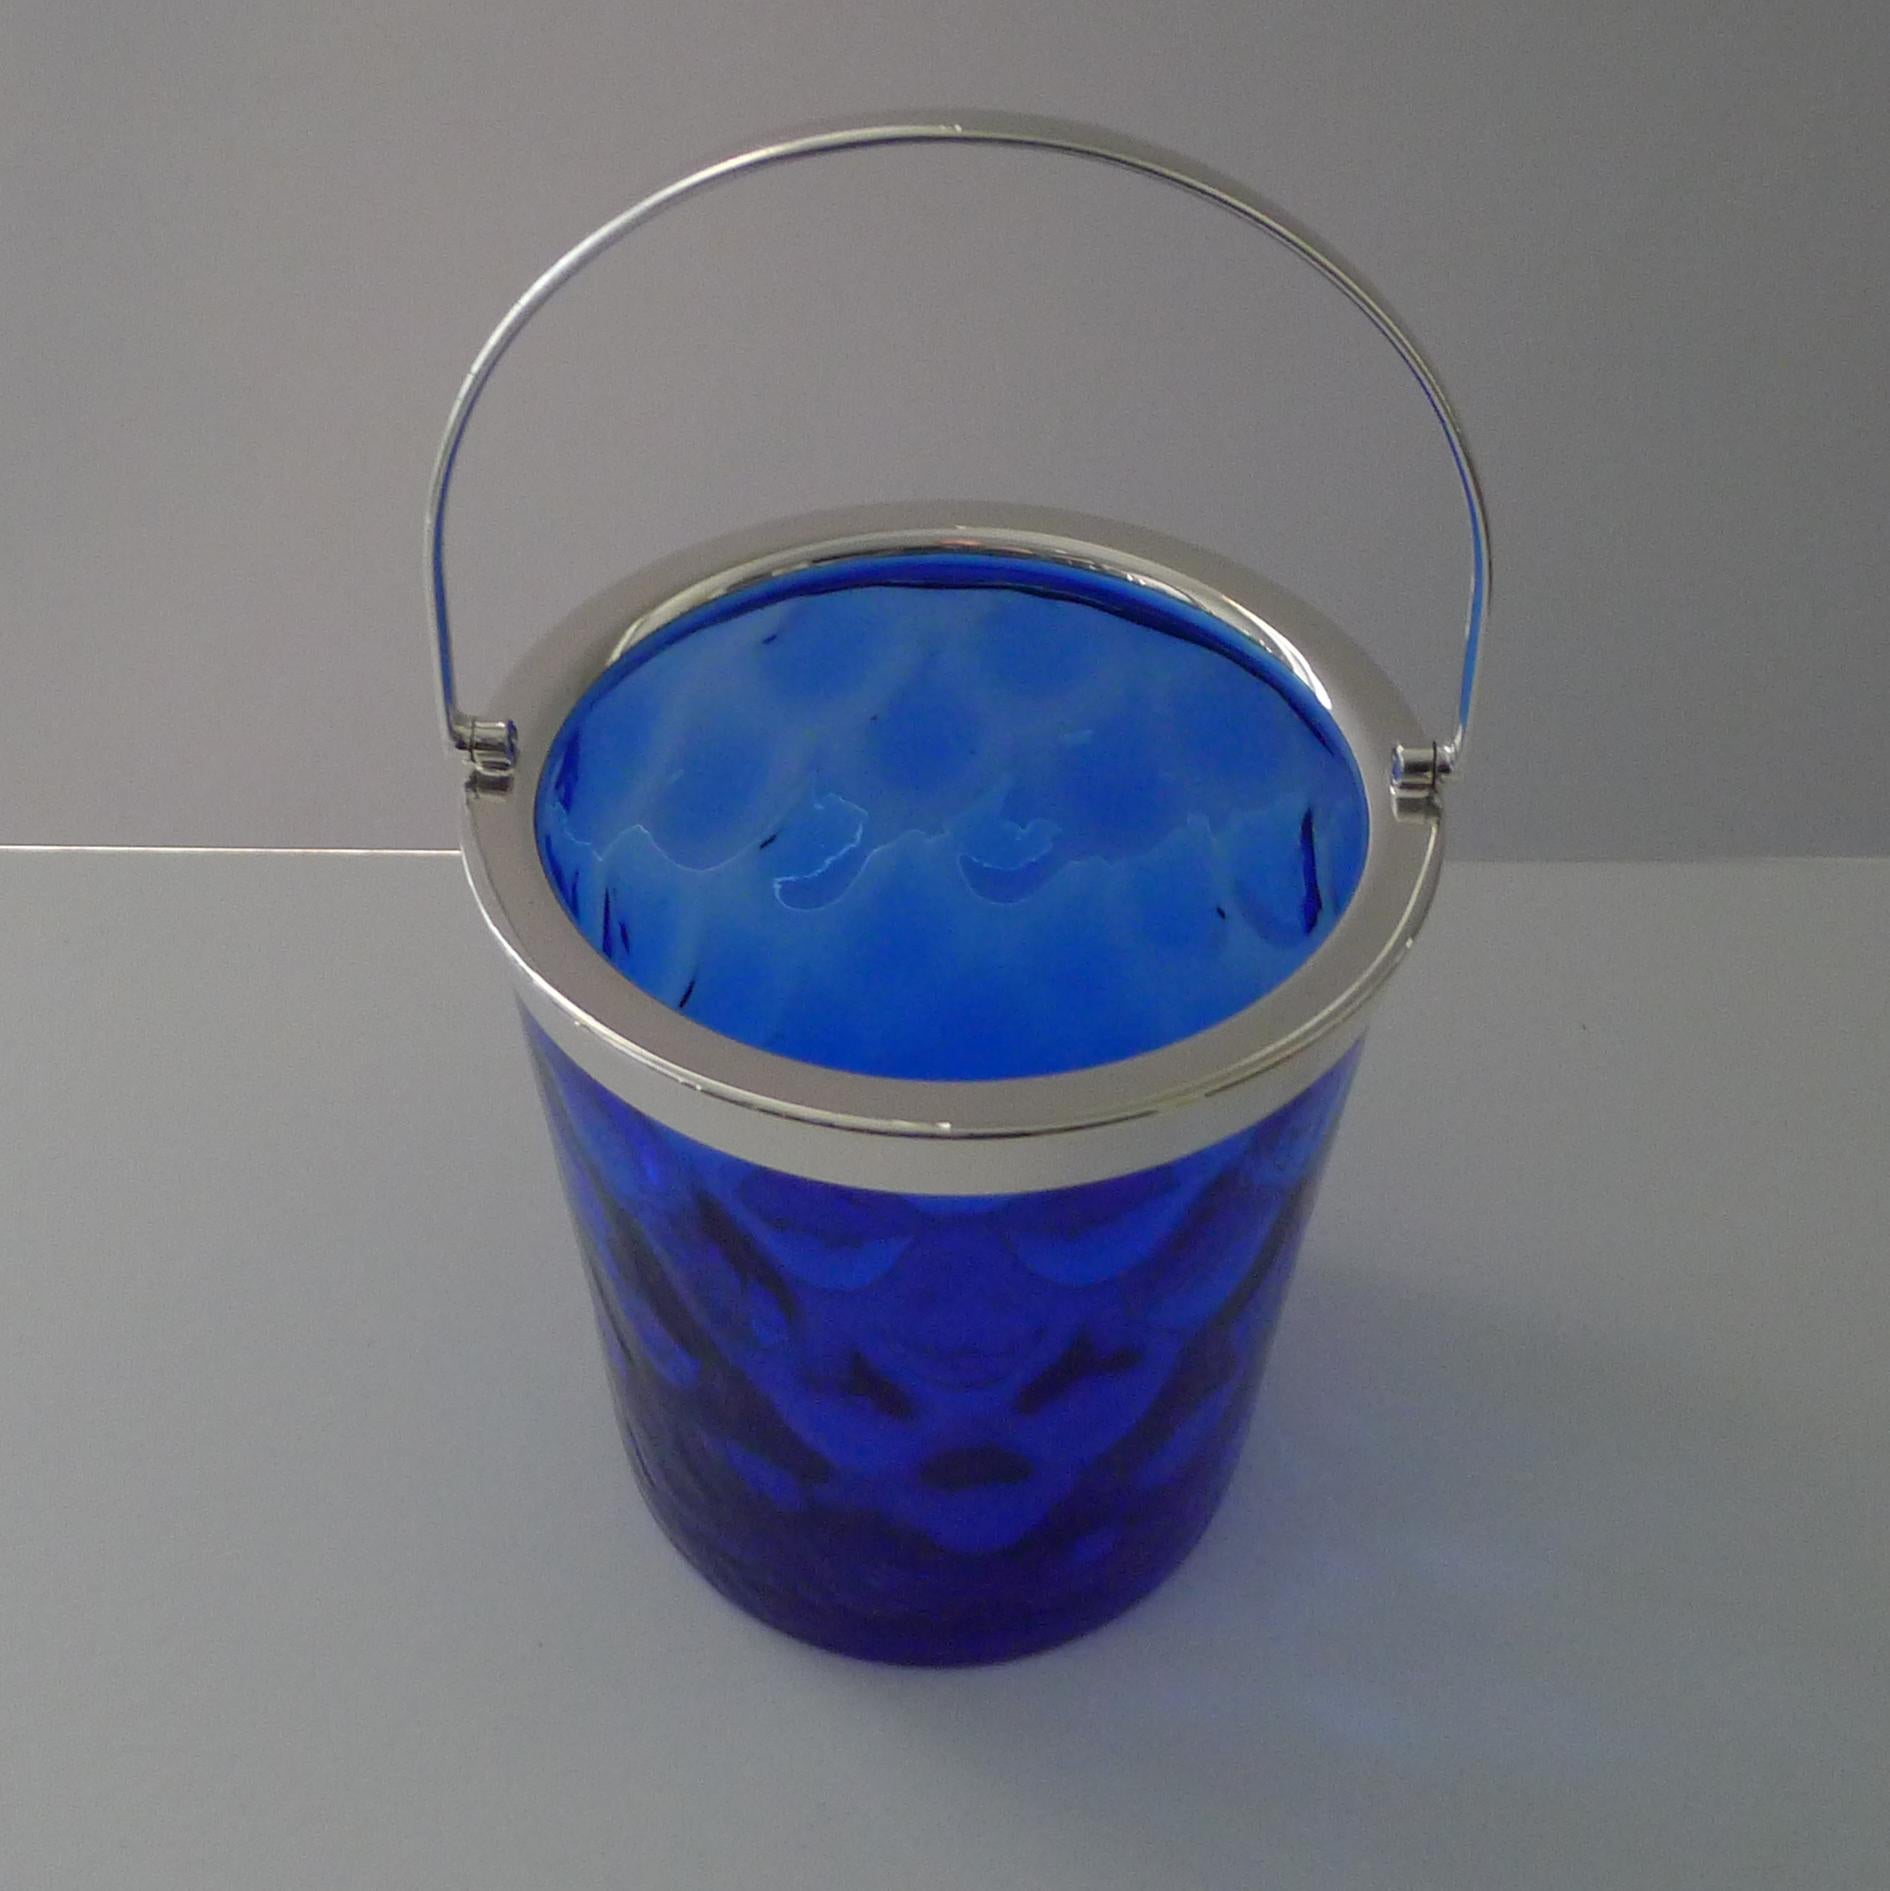 A handsome vintage ice bucket made from hand-blown Bristol blue glass with a polished pontil mark on the underside.

The glass has a rippled design and the fittings made from silver plate.  No marks, English in origin and dating to the